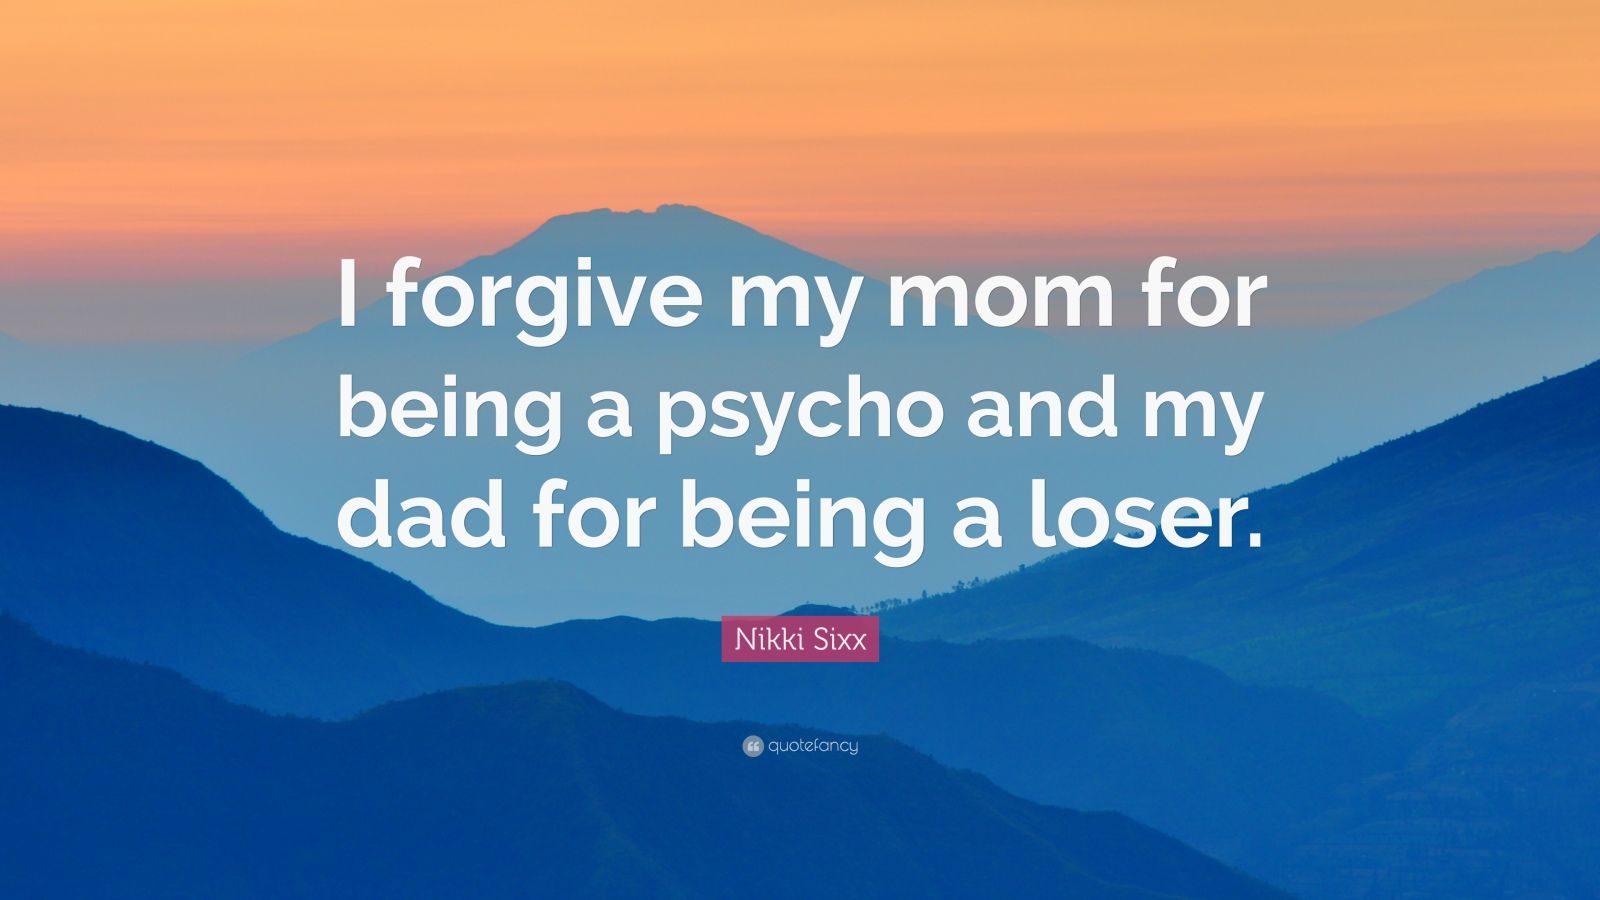 Nikki Sixx Quote “i Forgive My Mom For Being A Psycho And My Dad For